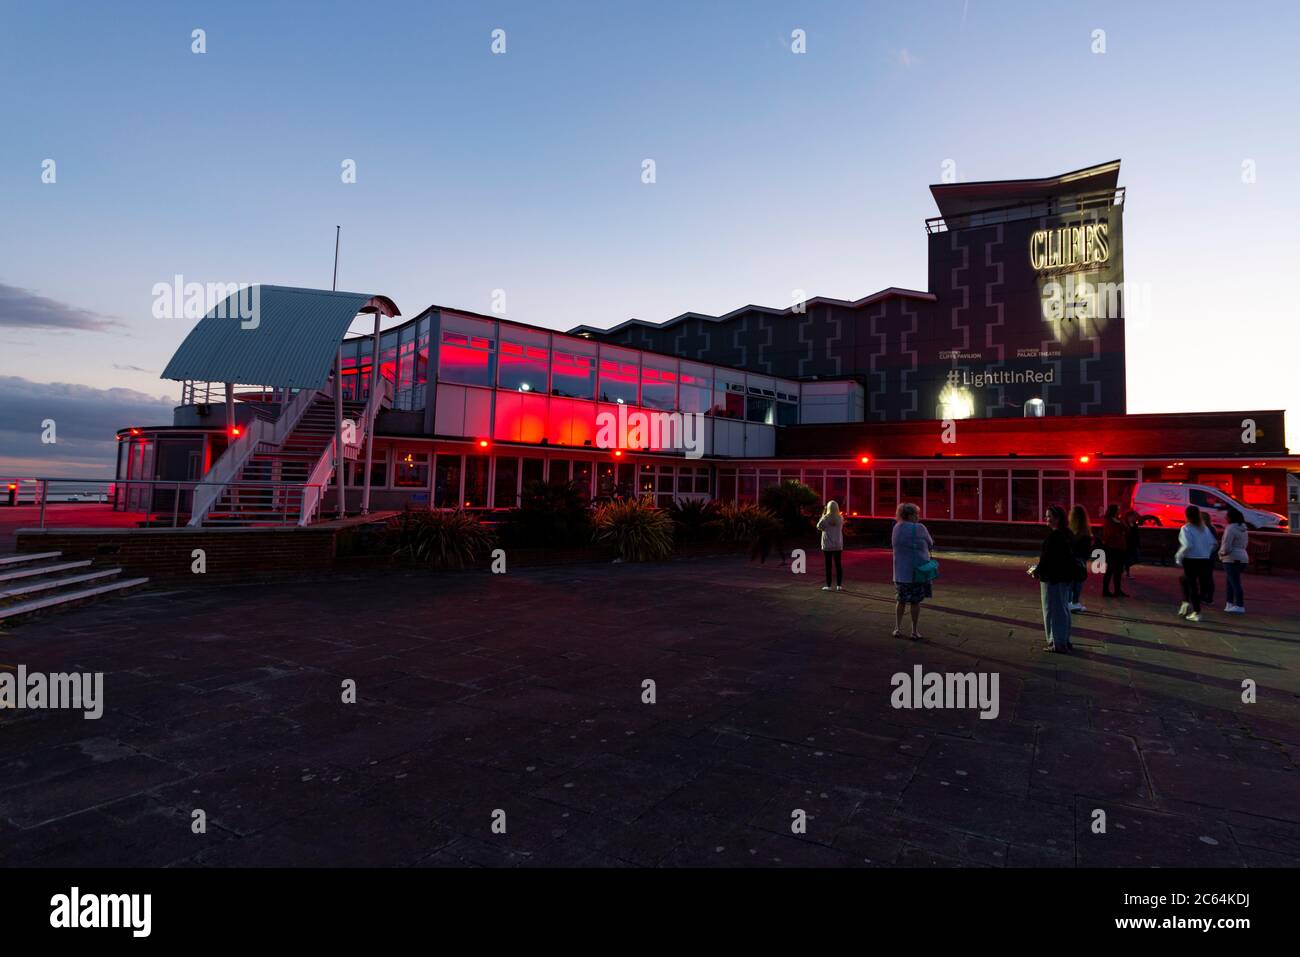 Cliffs Pavilion theatre illuminated red in support of entertainment and event industry during COVID-19 lockdown. Light it in red. Furloughed employees Stock Photo